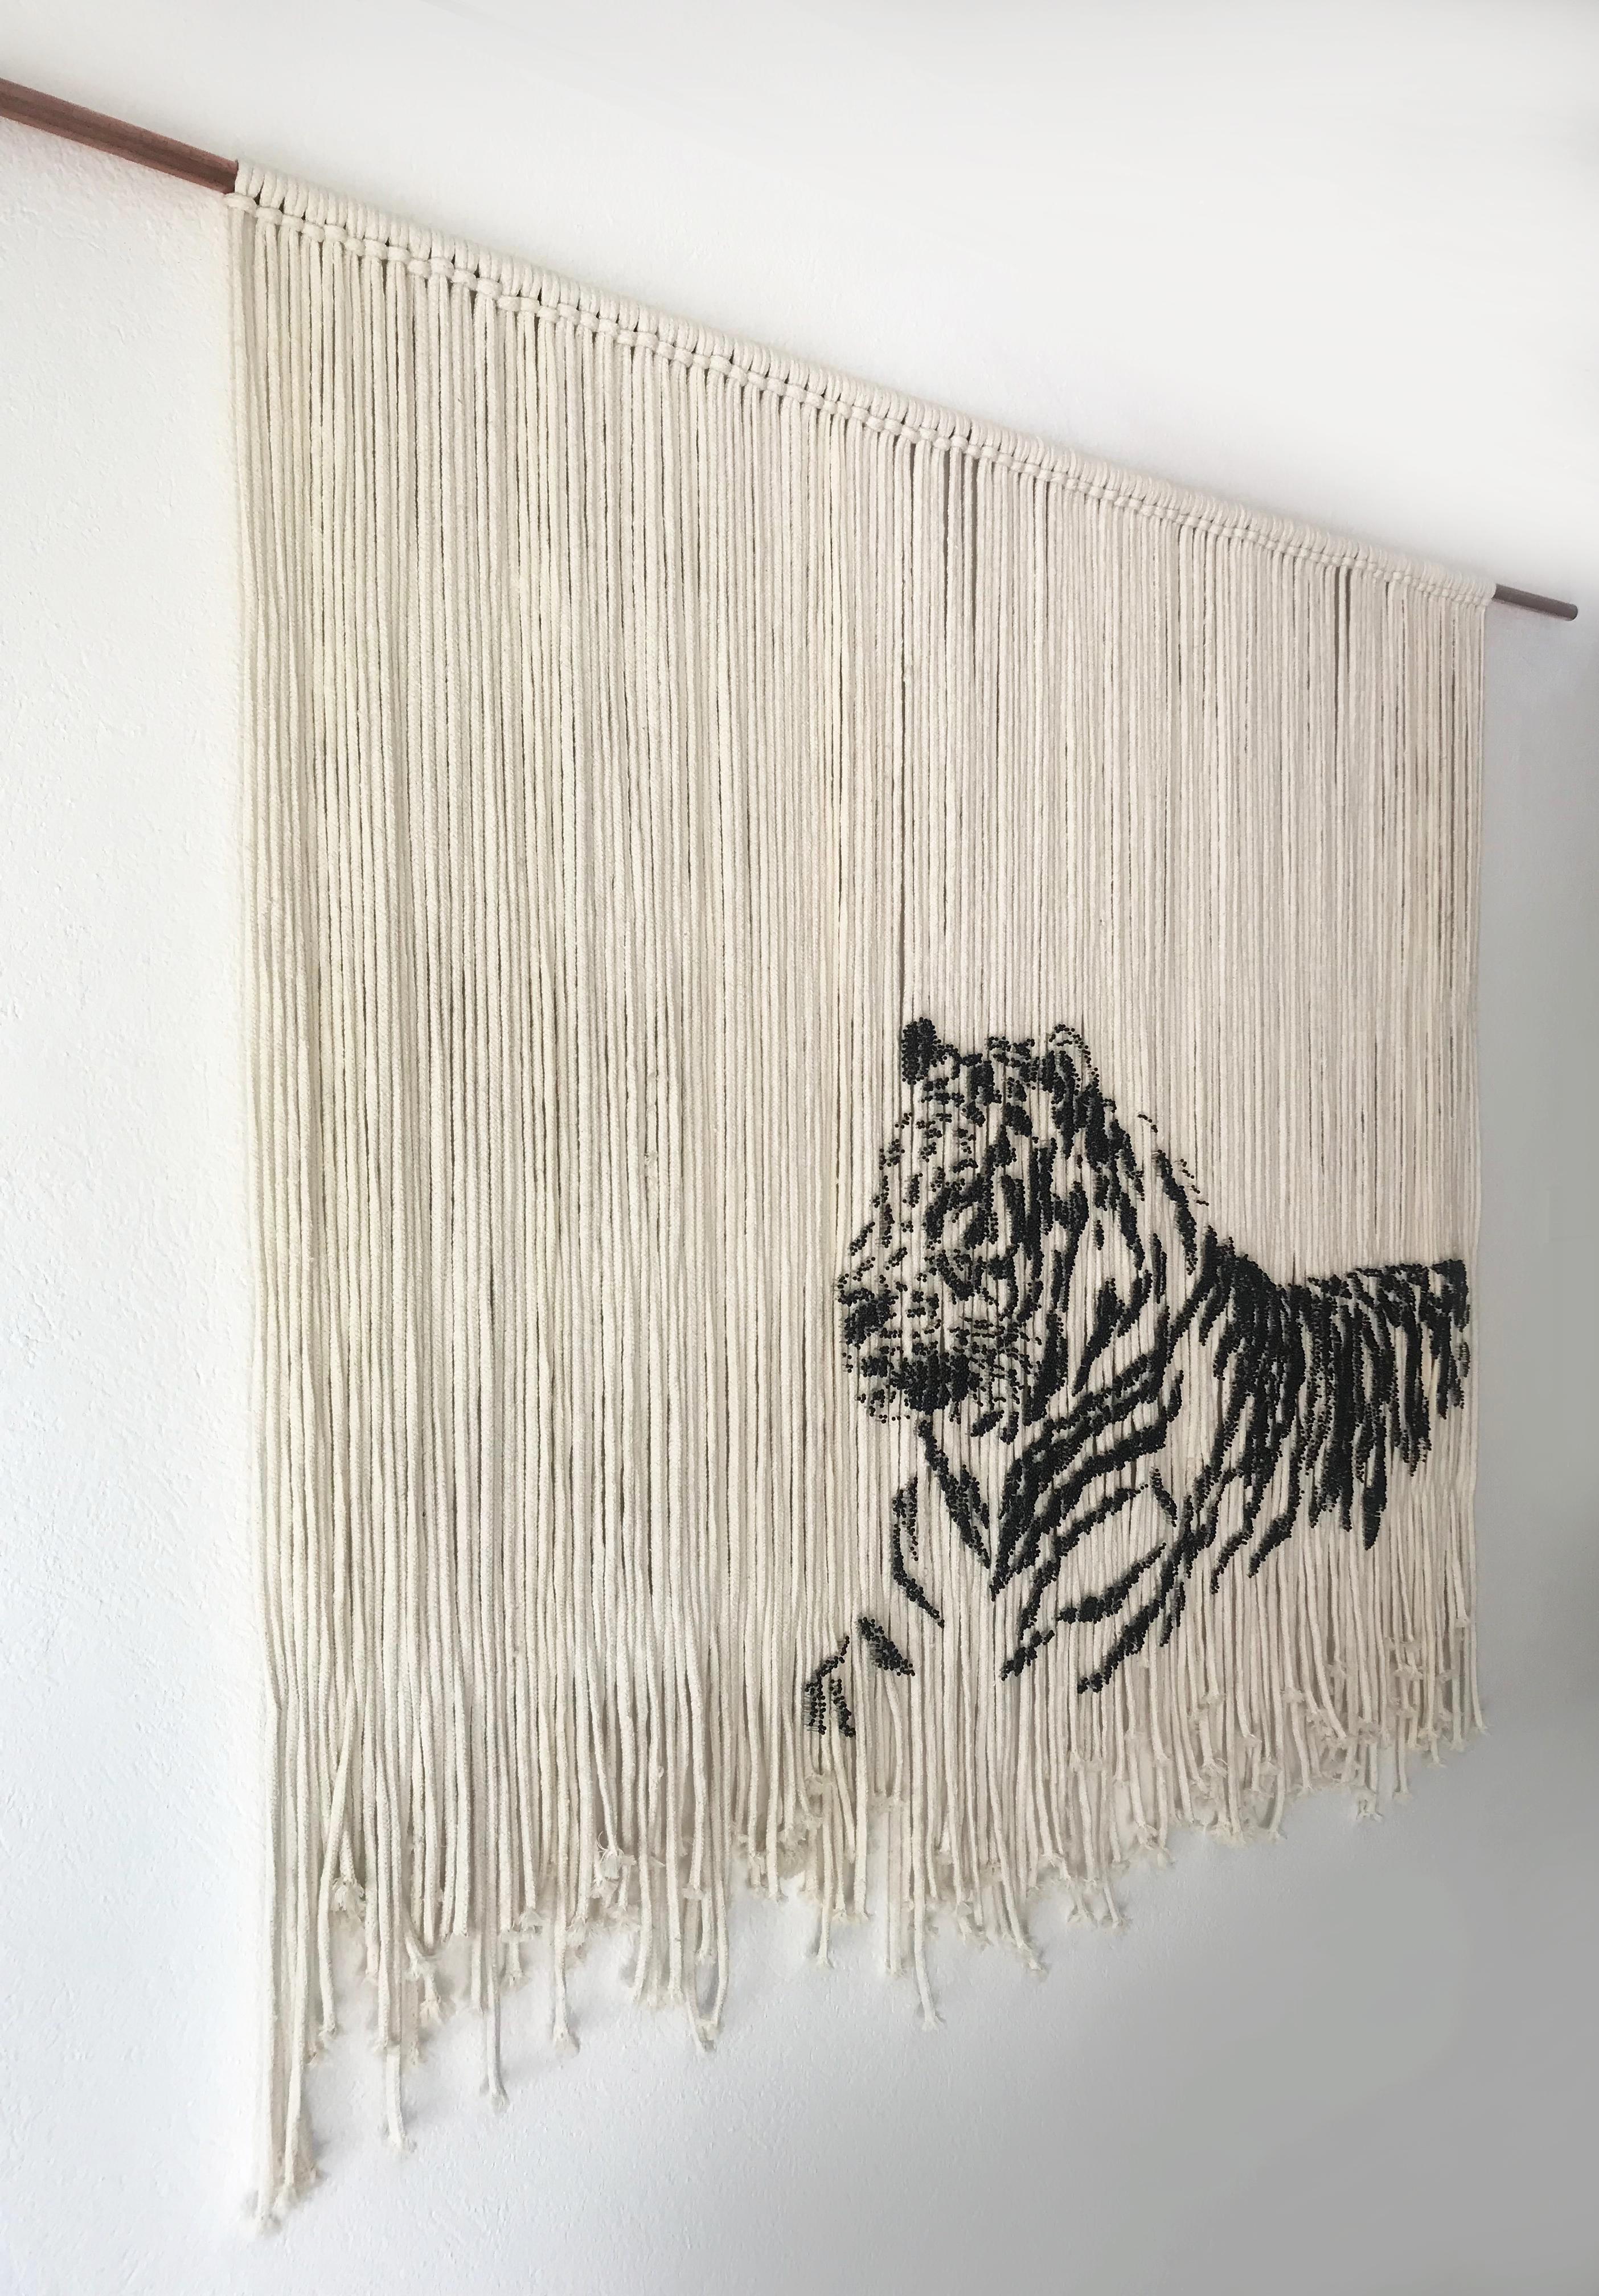 TIGER  Modern Animal Wall Art Sculpture For Hanging on Walls or Cieling 5